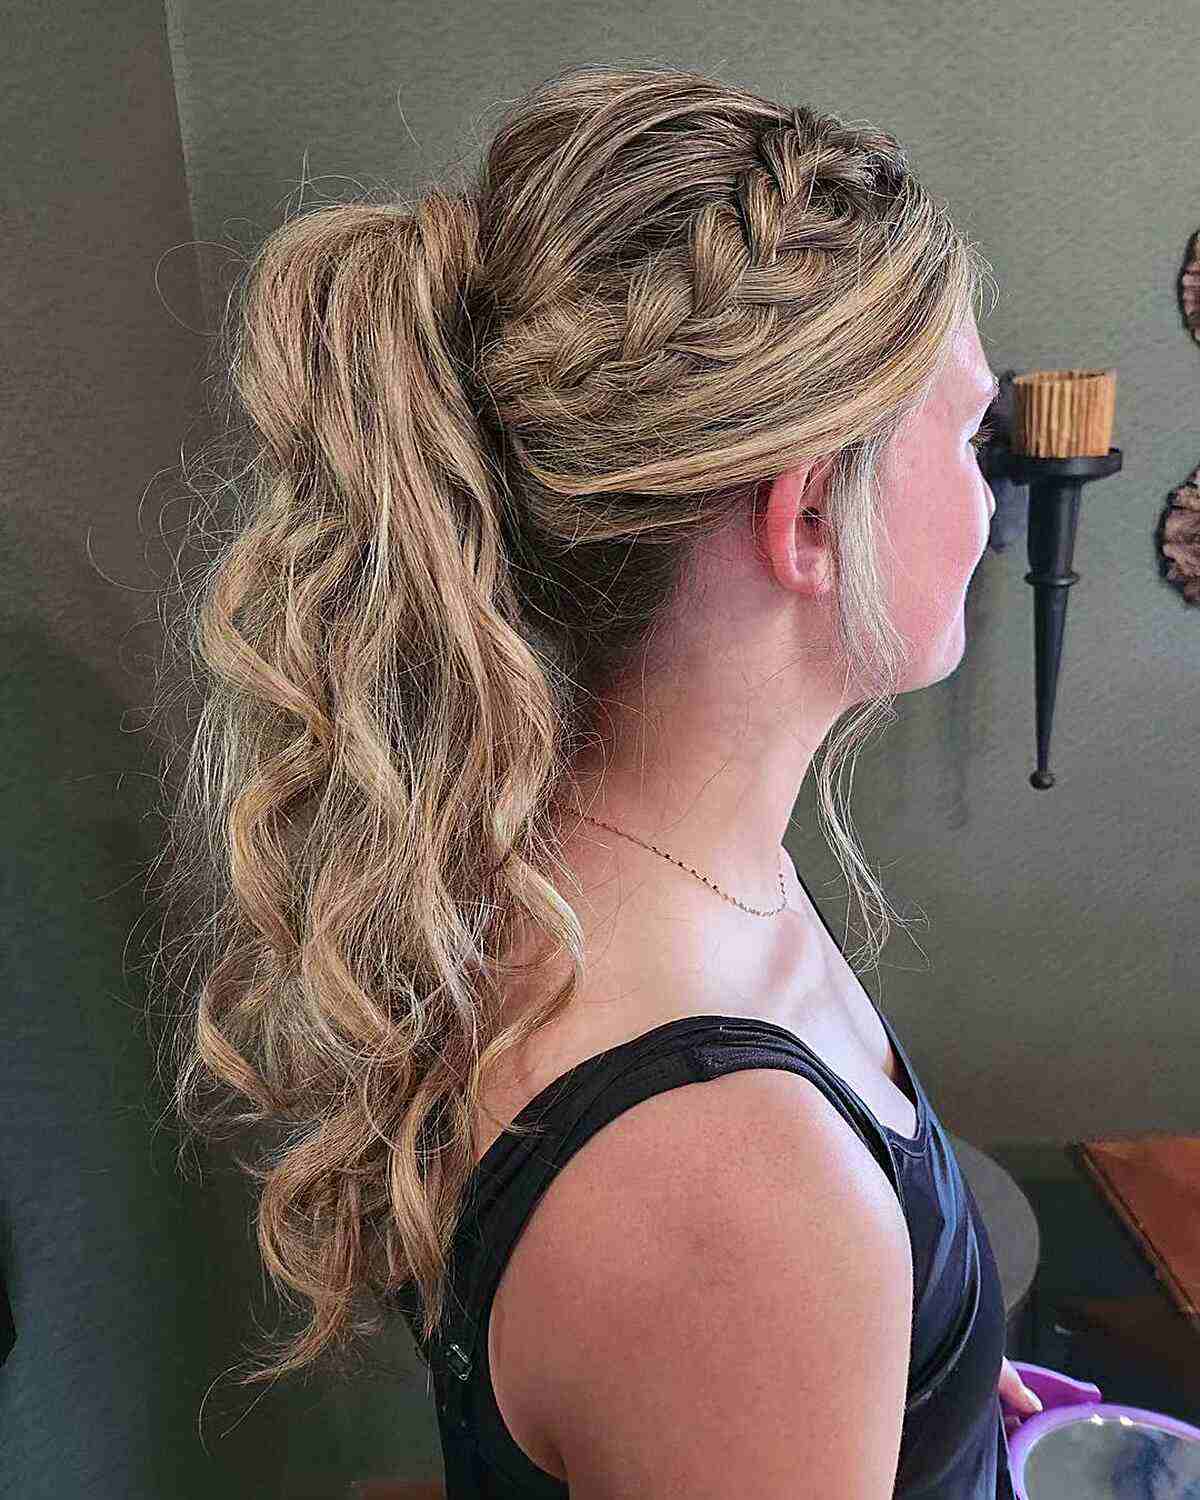 Volleyball Textured Long High Ponytail with Side Braid